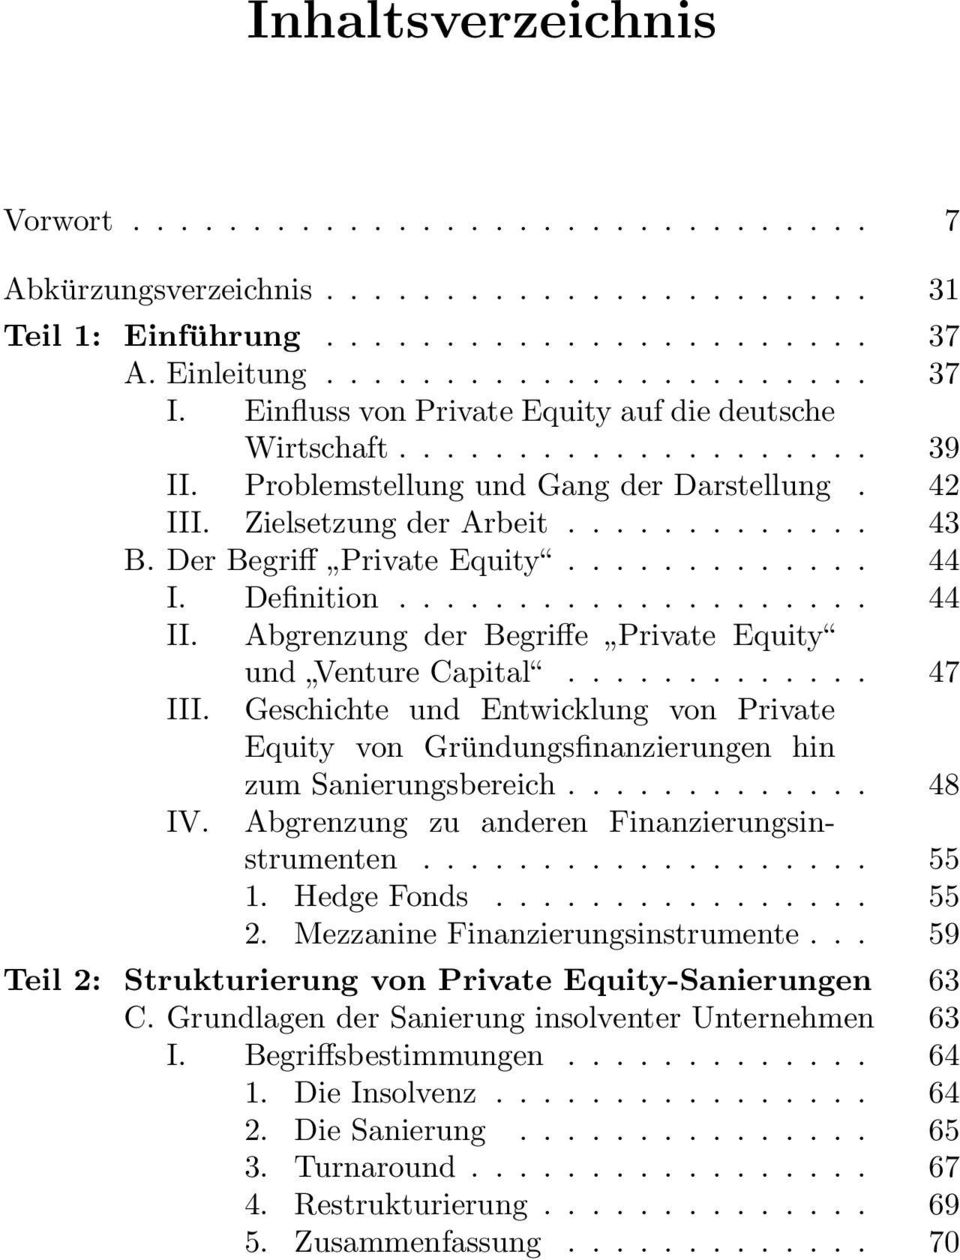 Der Begriff Private Equity............. 44 I. Definition.................... 44 II. Abgrenzung der Begriffe Private Equity und Venture Capital............. 47 III.